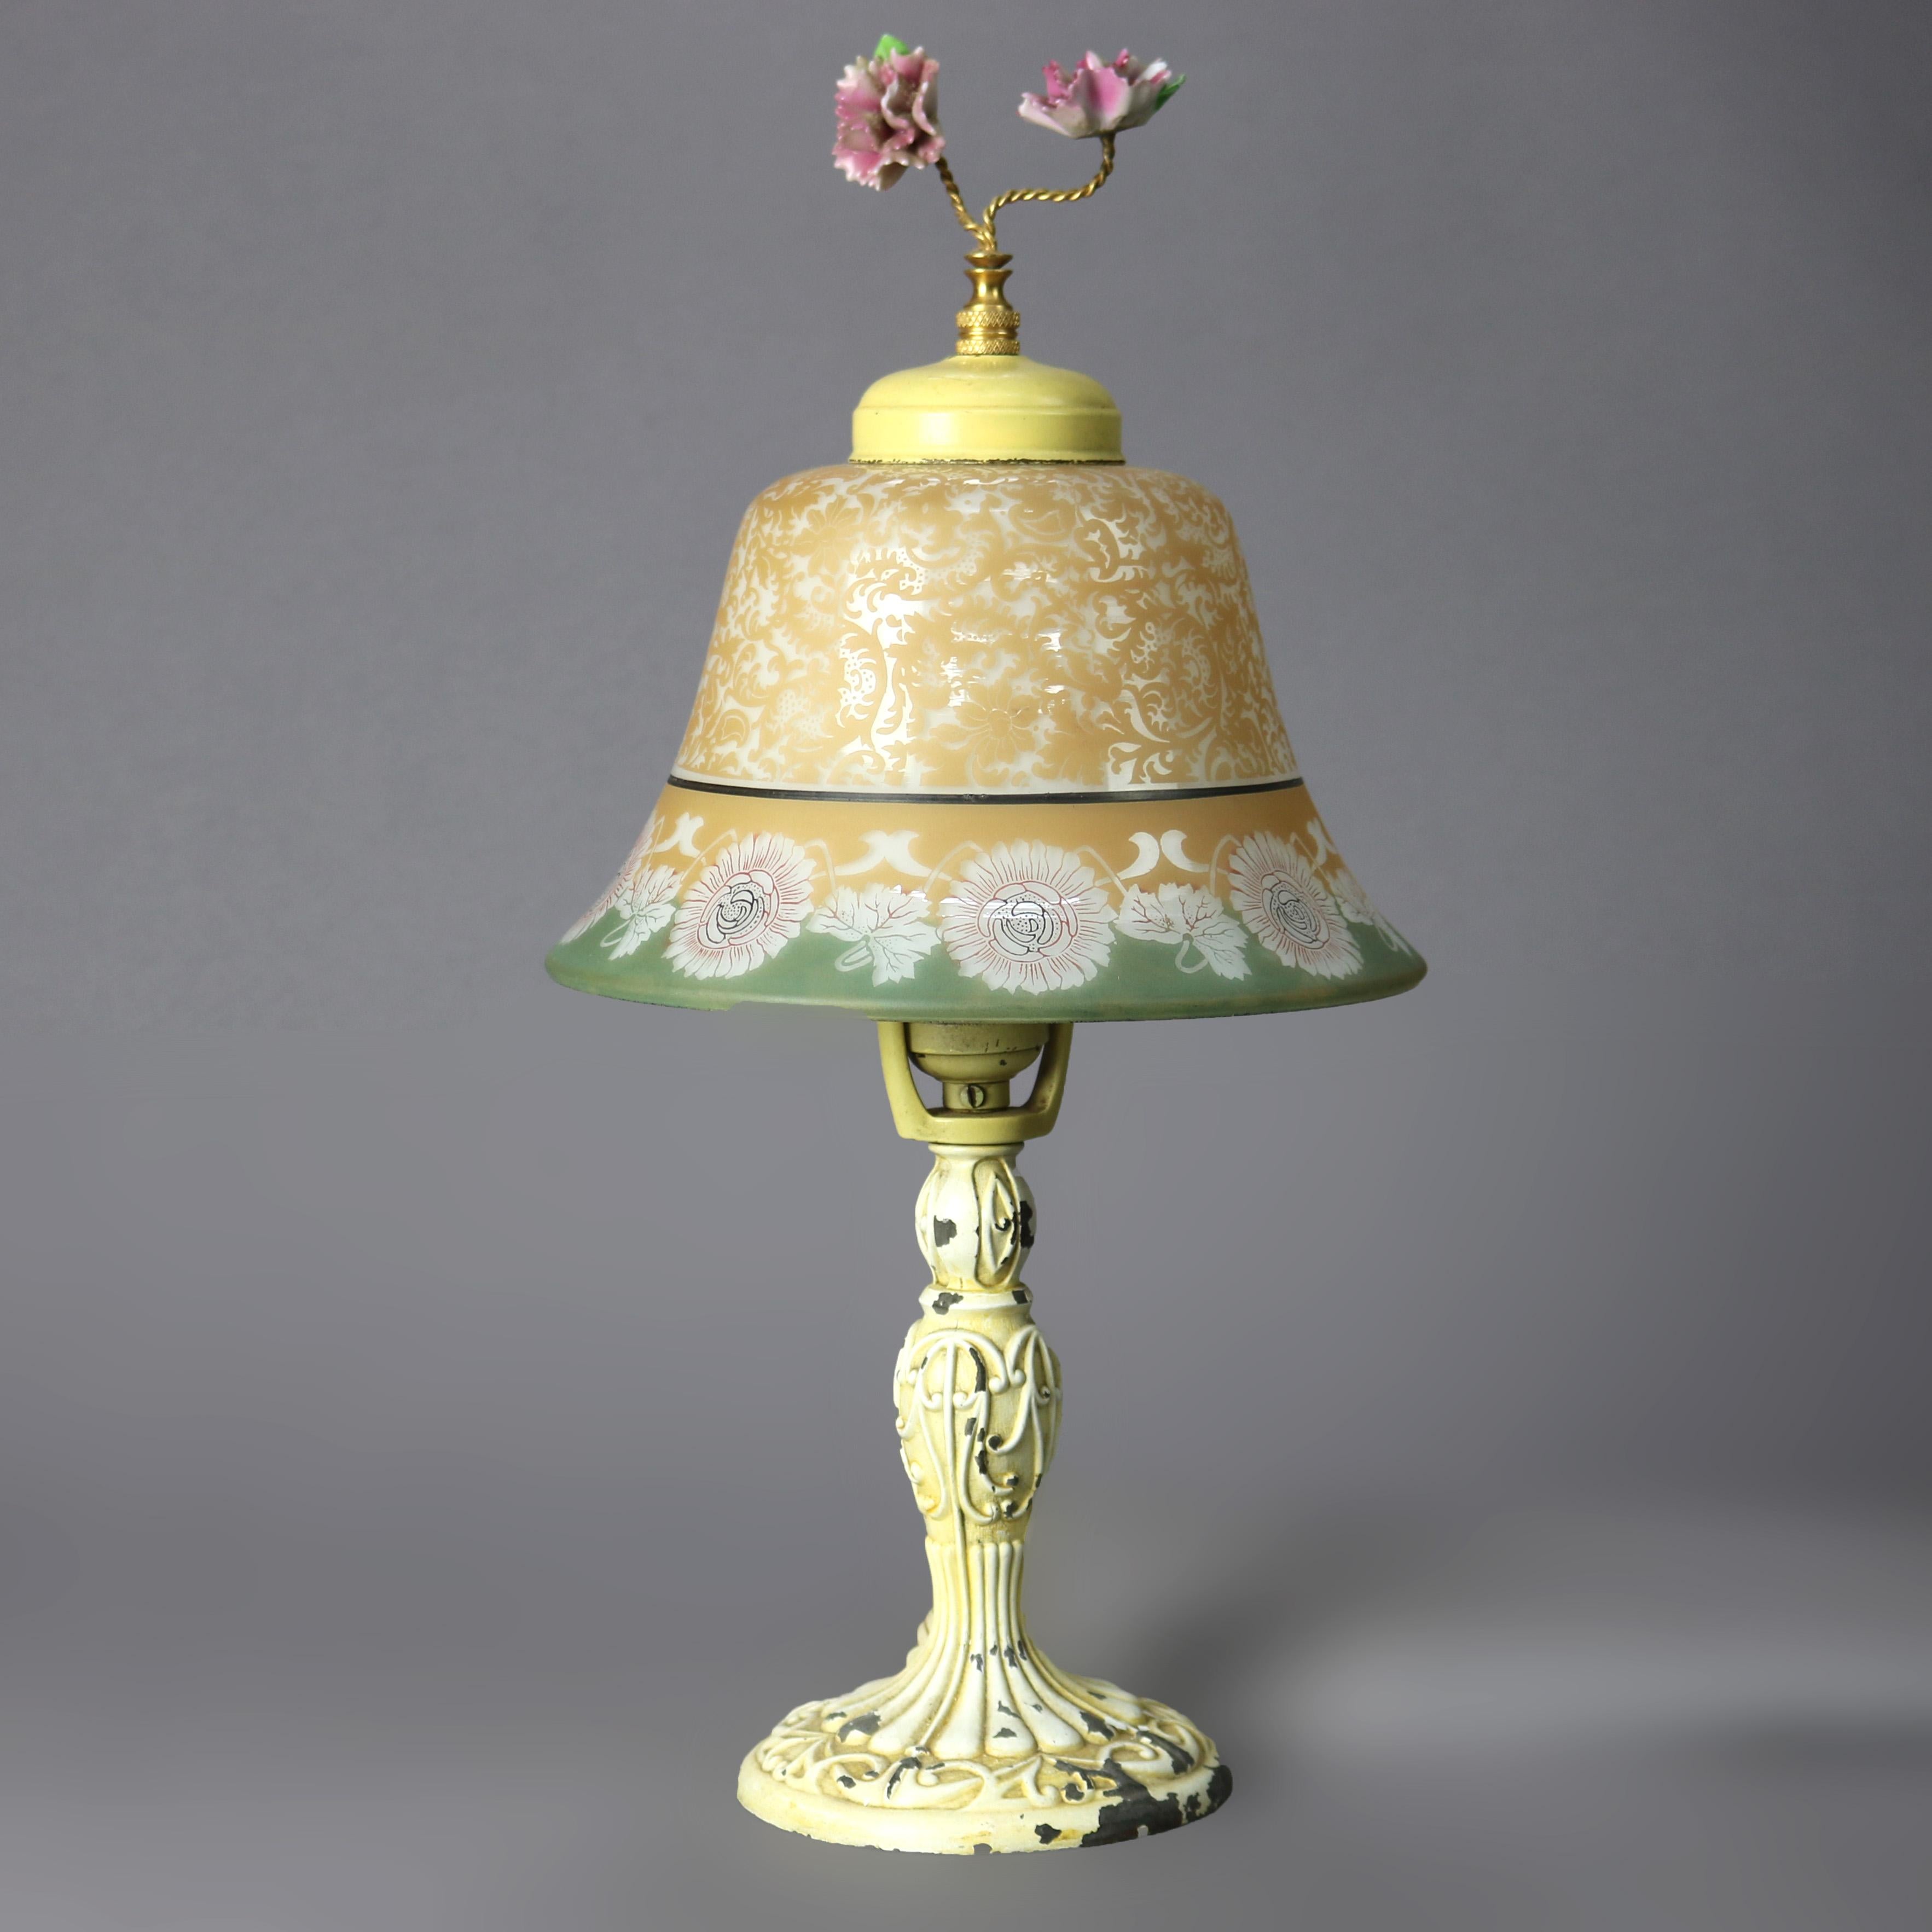 An antique Art Deco boudoir lamp by Bellova offers glass shade with floral band over single socket painted base, circa 1920

Measures - 15.75